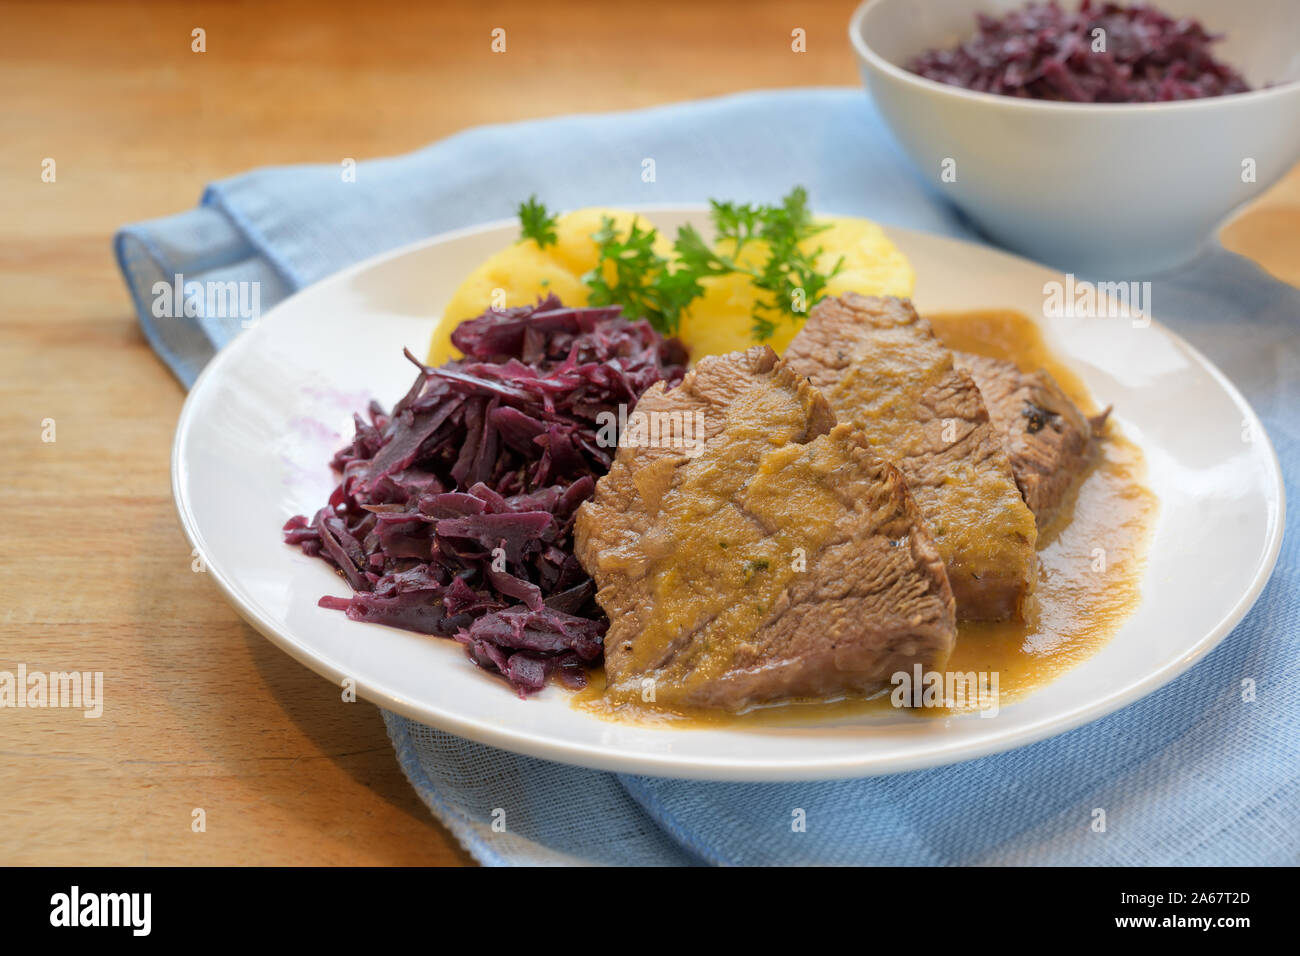 braised beef with potatoes, red cabbage and parsley garnish on a plate, blue napkin on a wooden table, selected focus, very narrow depth of field Stock Photo